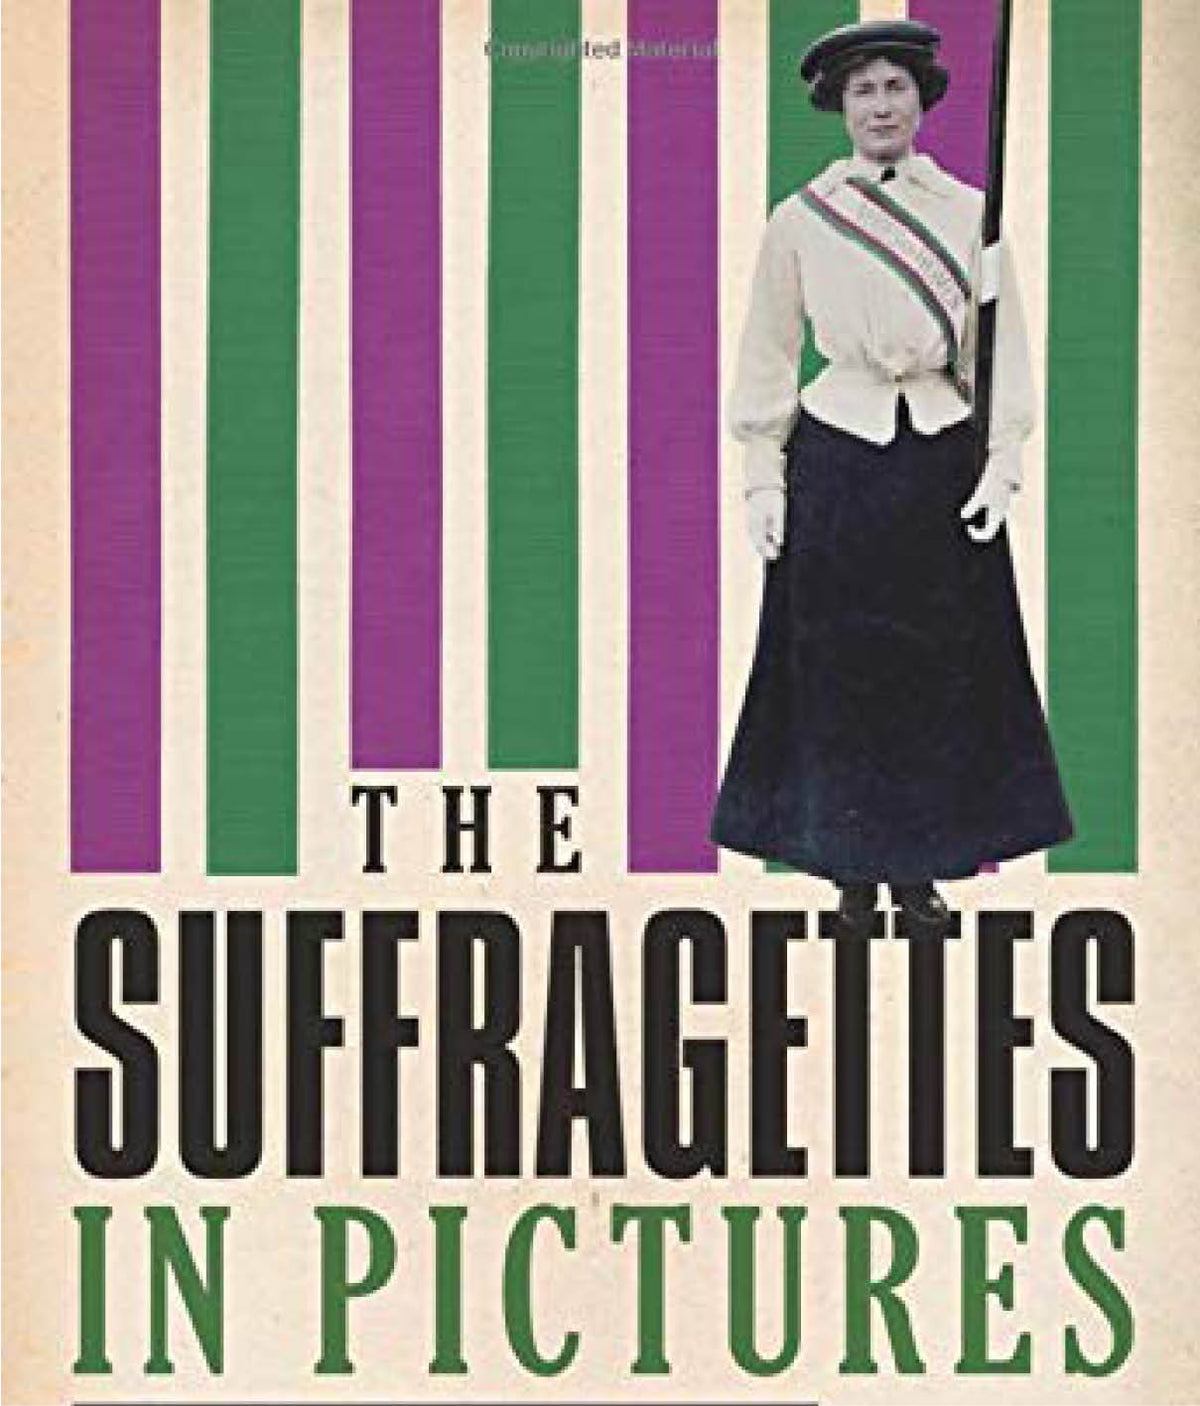 The Suffragettes In Pictures by Diane Atkinson and Glenda Jackson